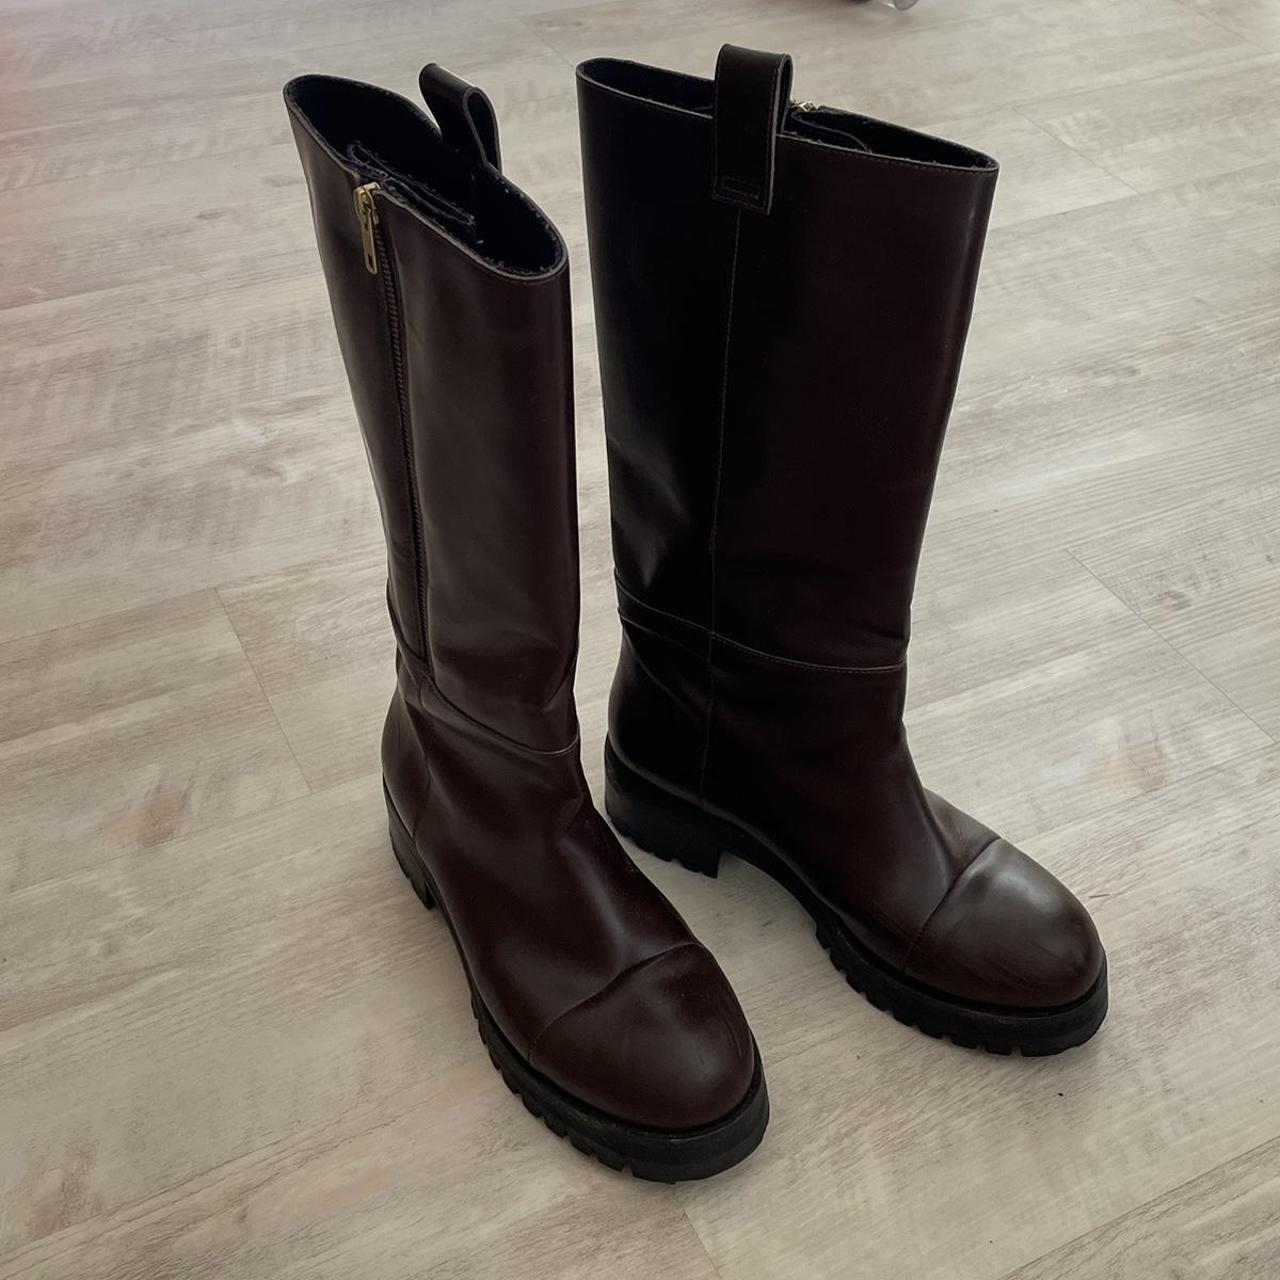 marni calf boots in burgundy size 38 comes with... - Depop